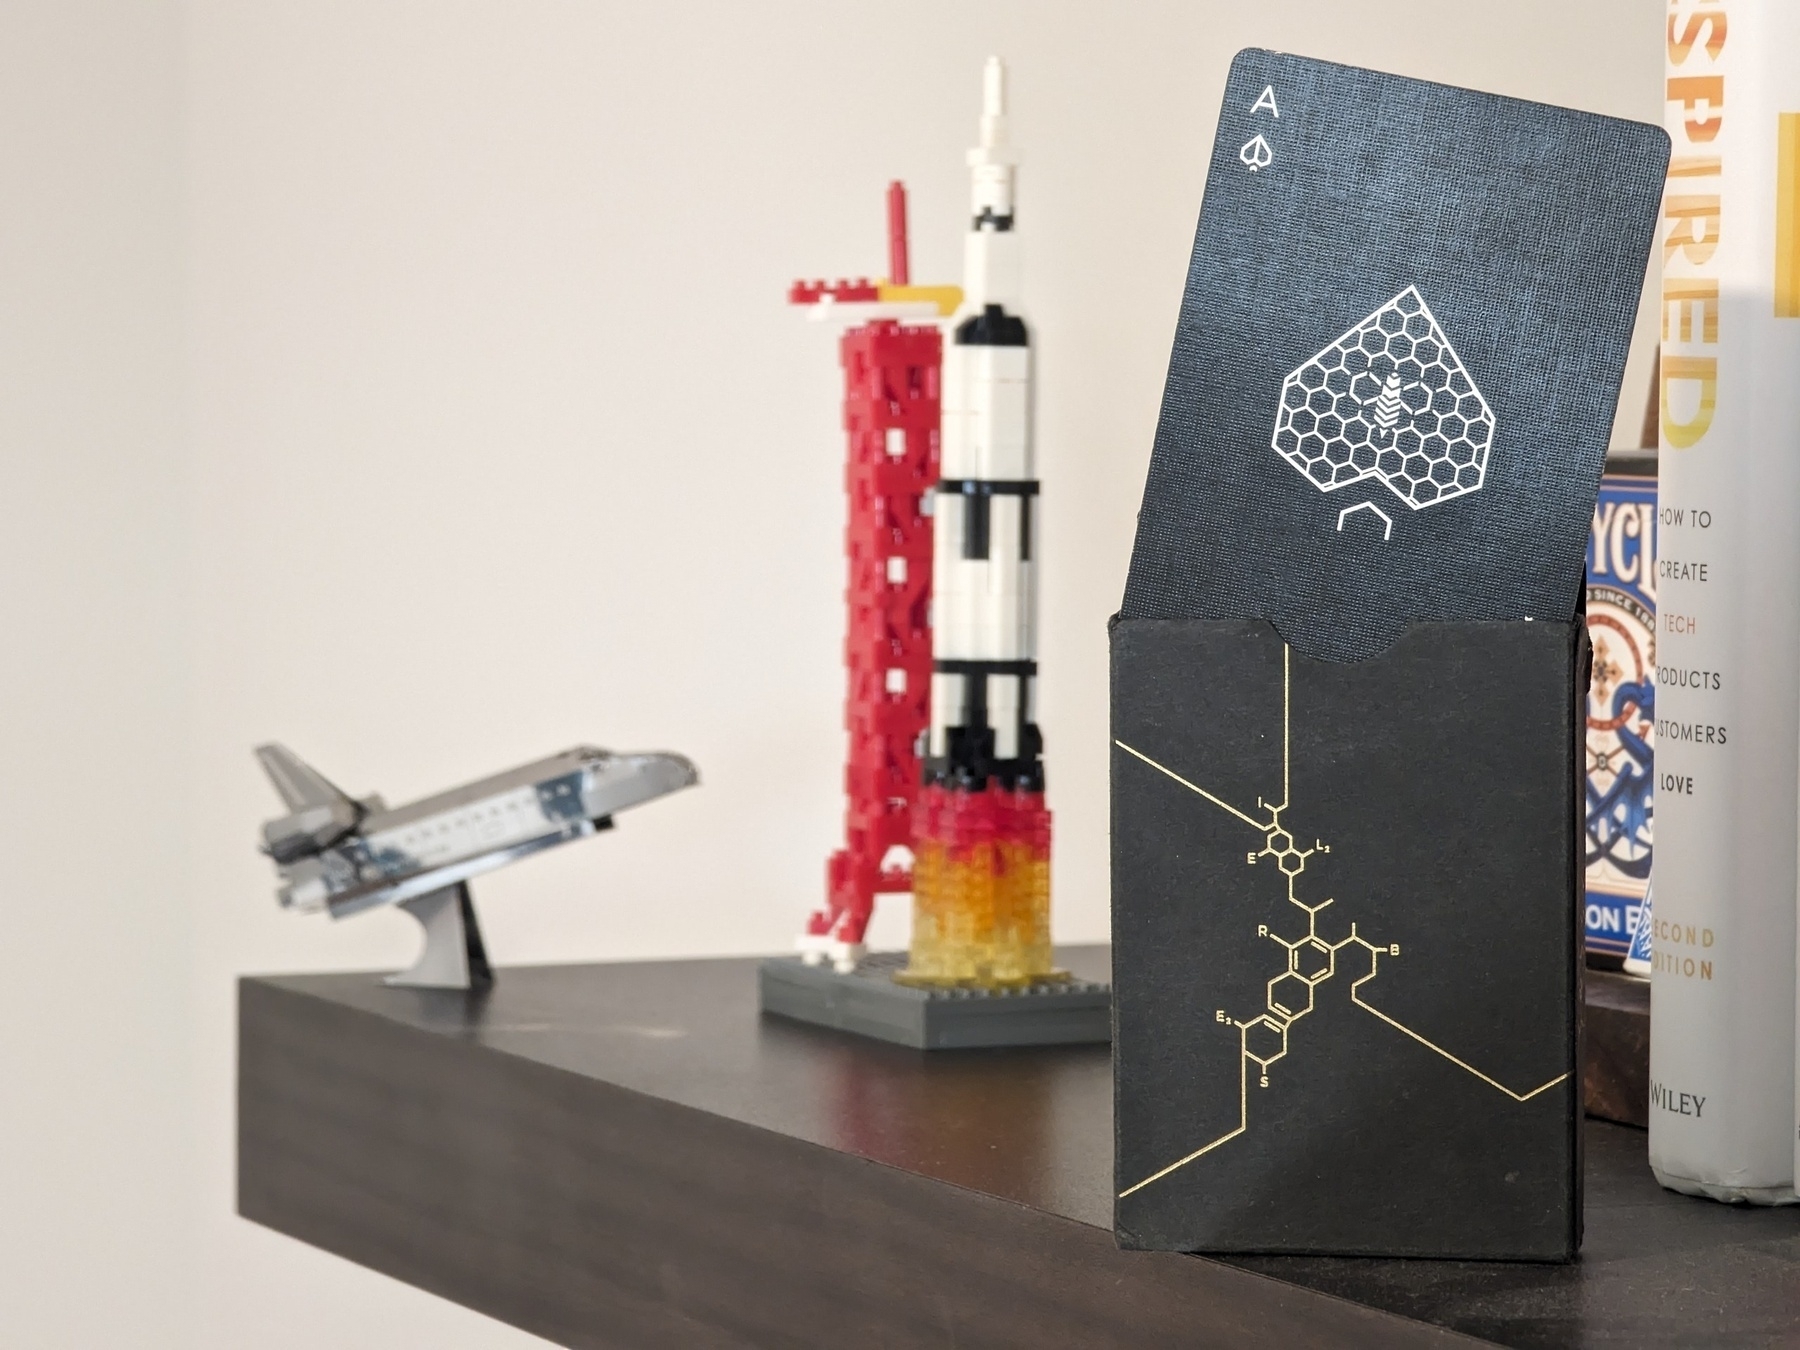 An ace of spades sticking out of a box of cards with a holographic beehive theme. Spacecraft models are blurred in the background.